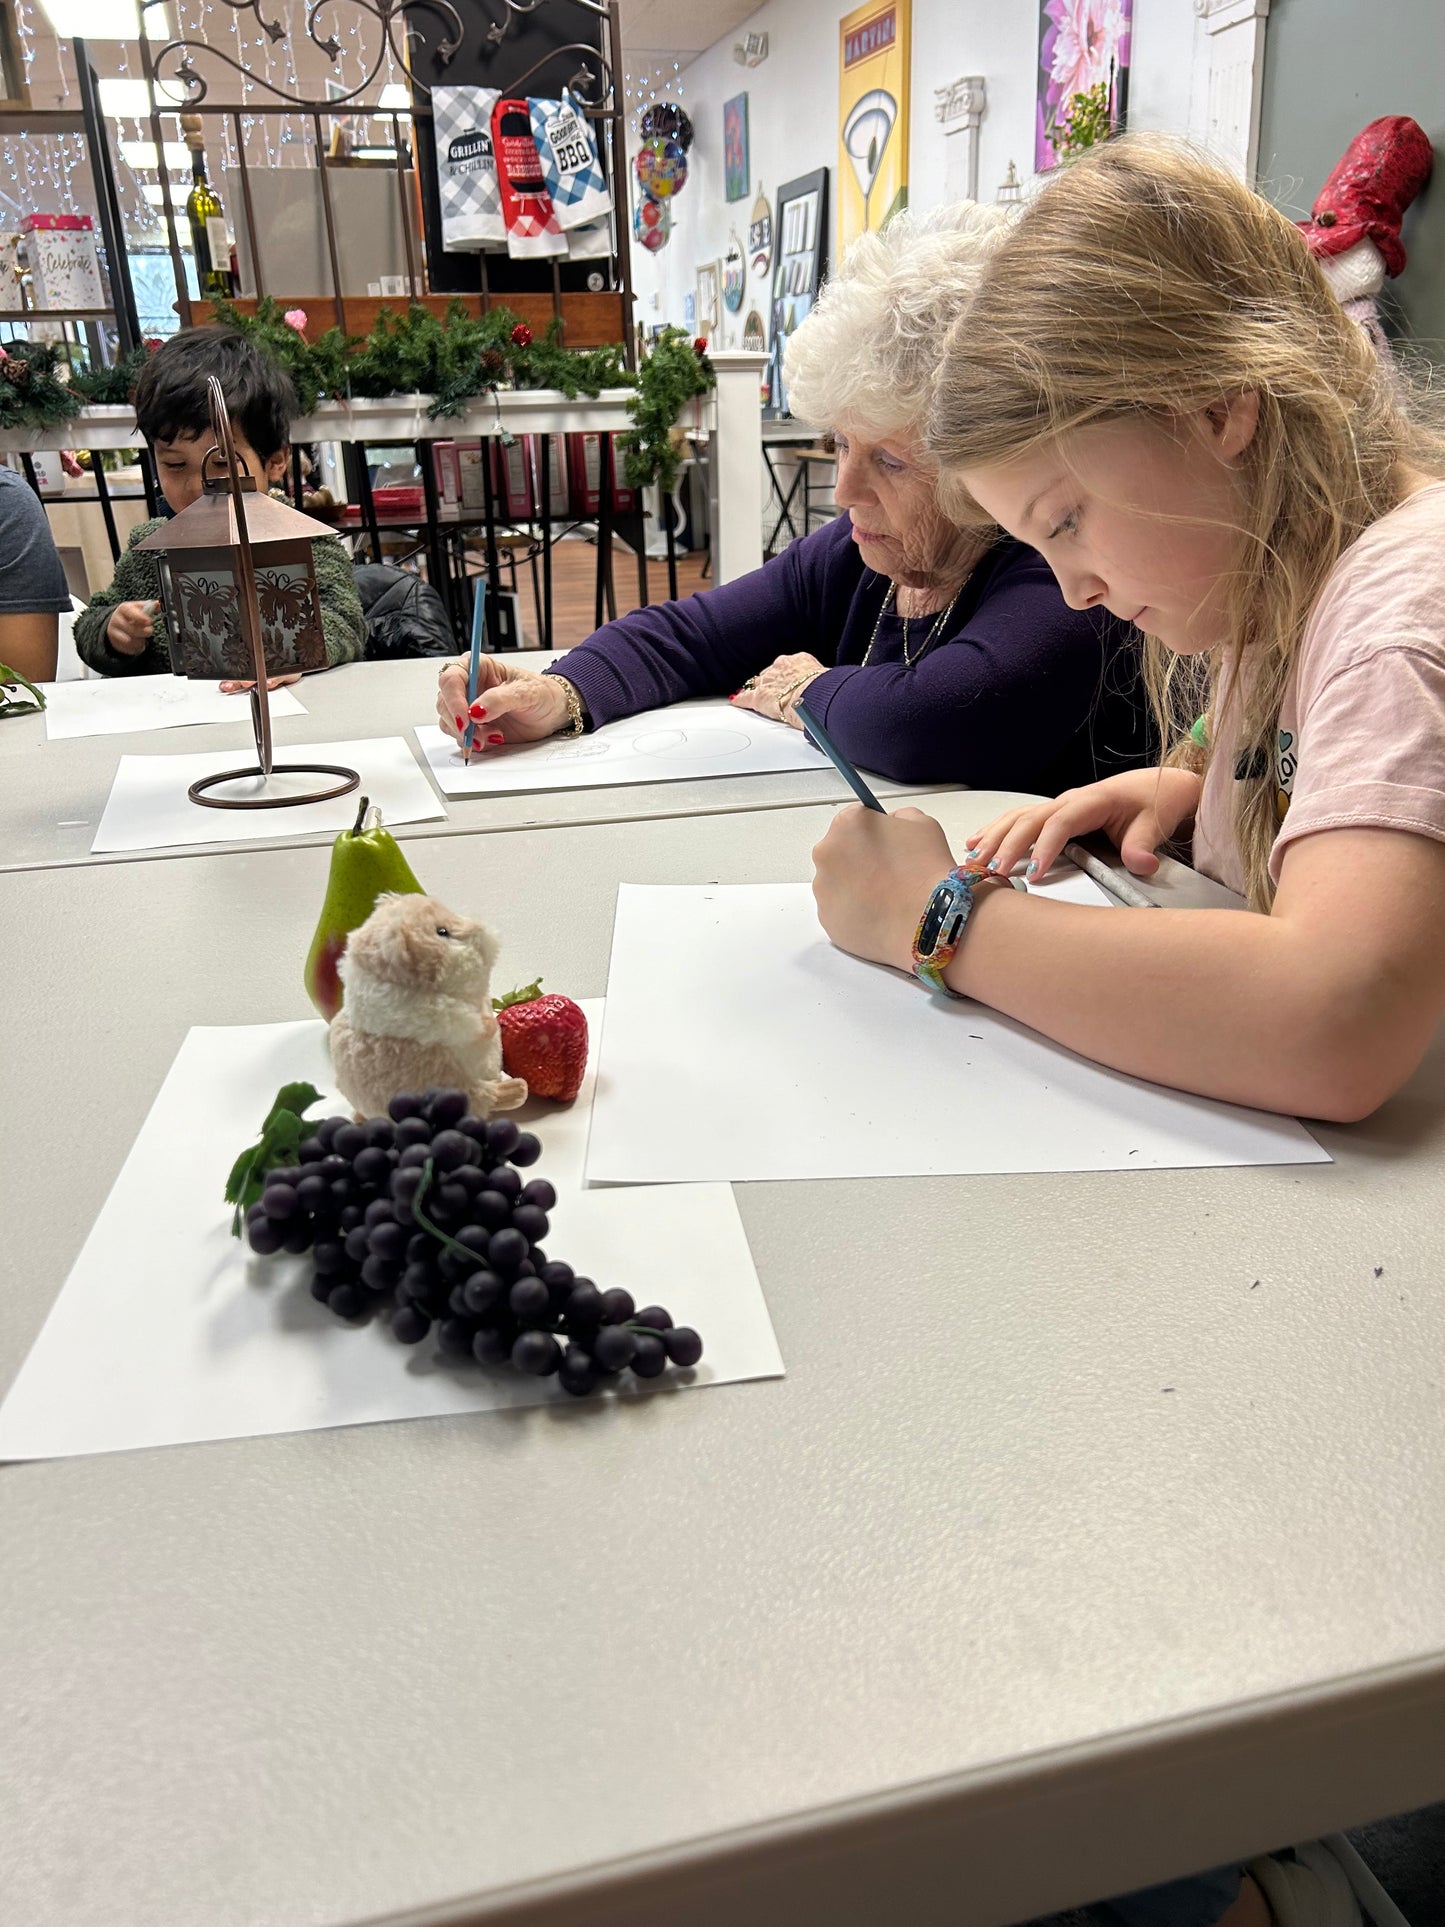 June 8th - Family Fun Drawing Class (Parent/Child)